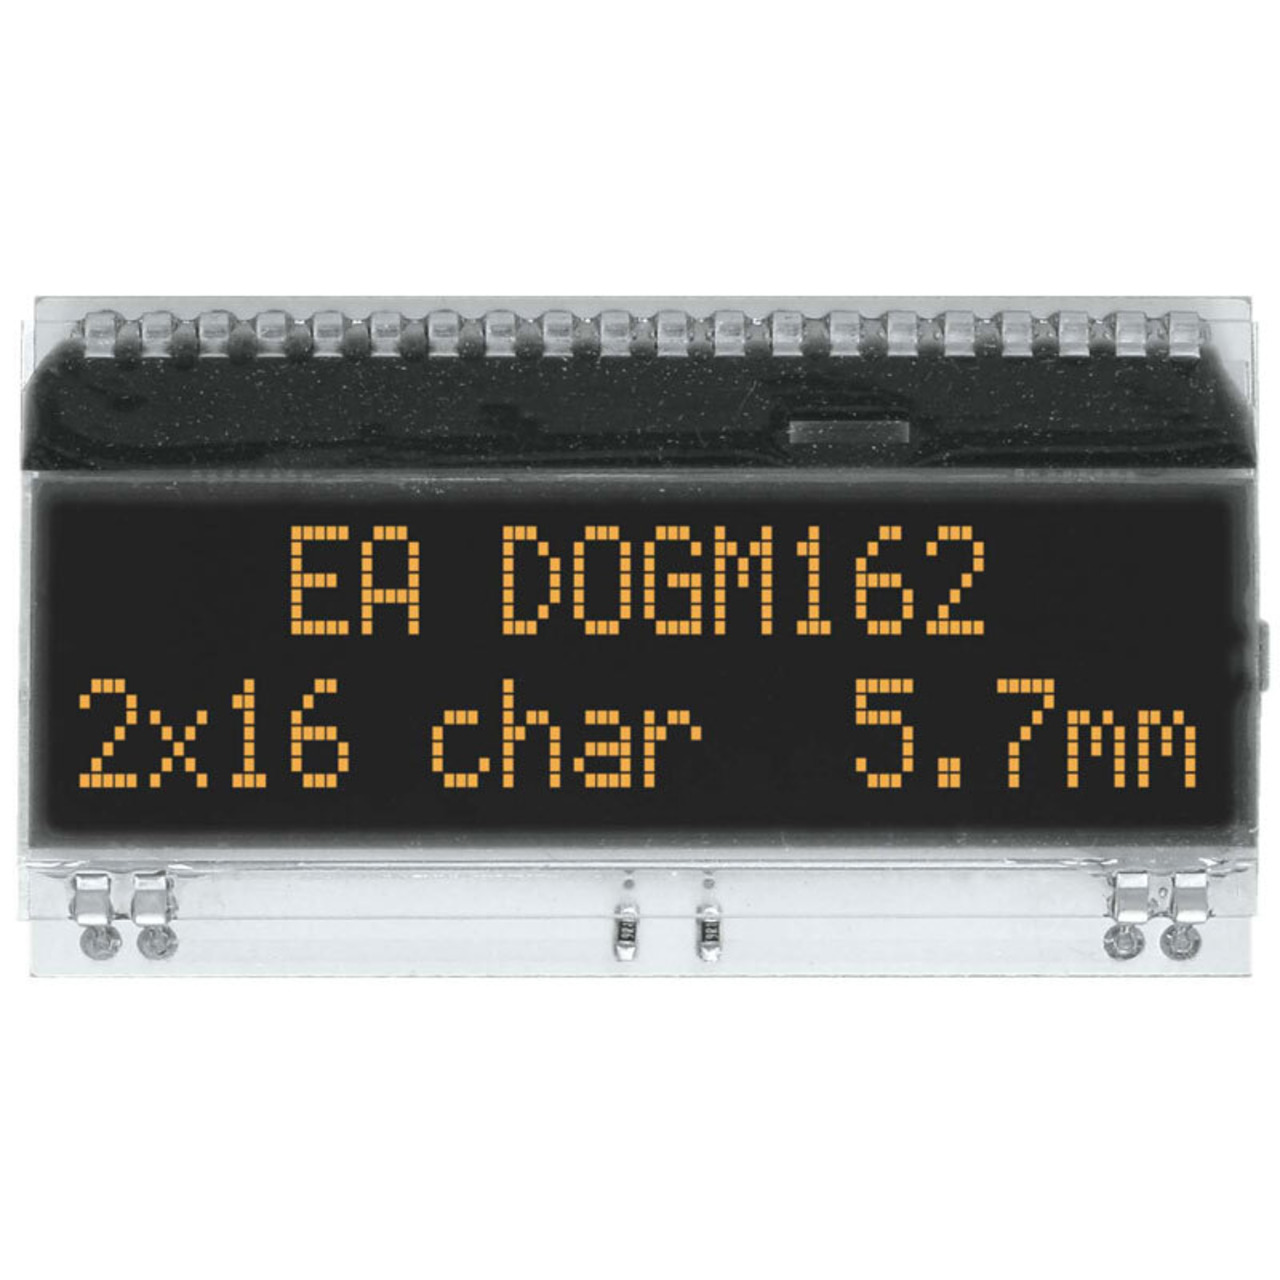 Chip-on-Glass-LC-Display EA DOGM162S-A unter Komponenten